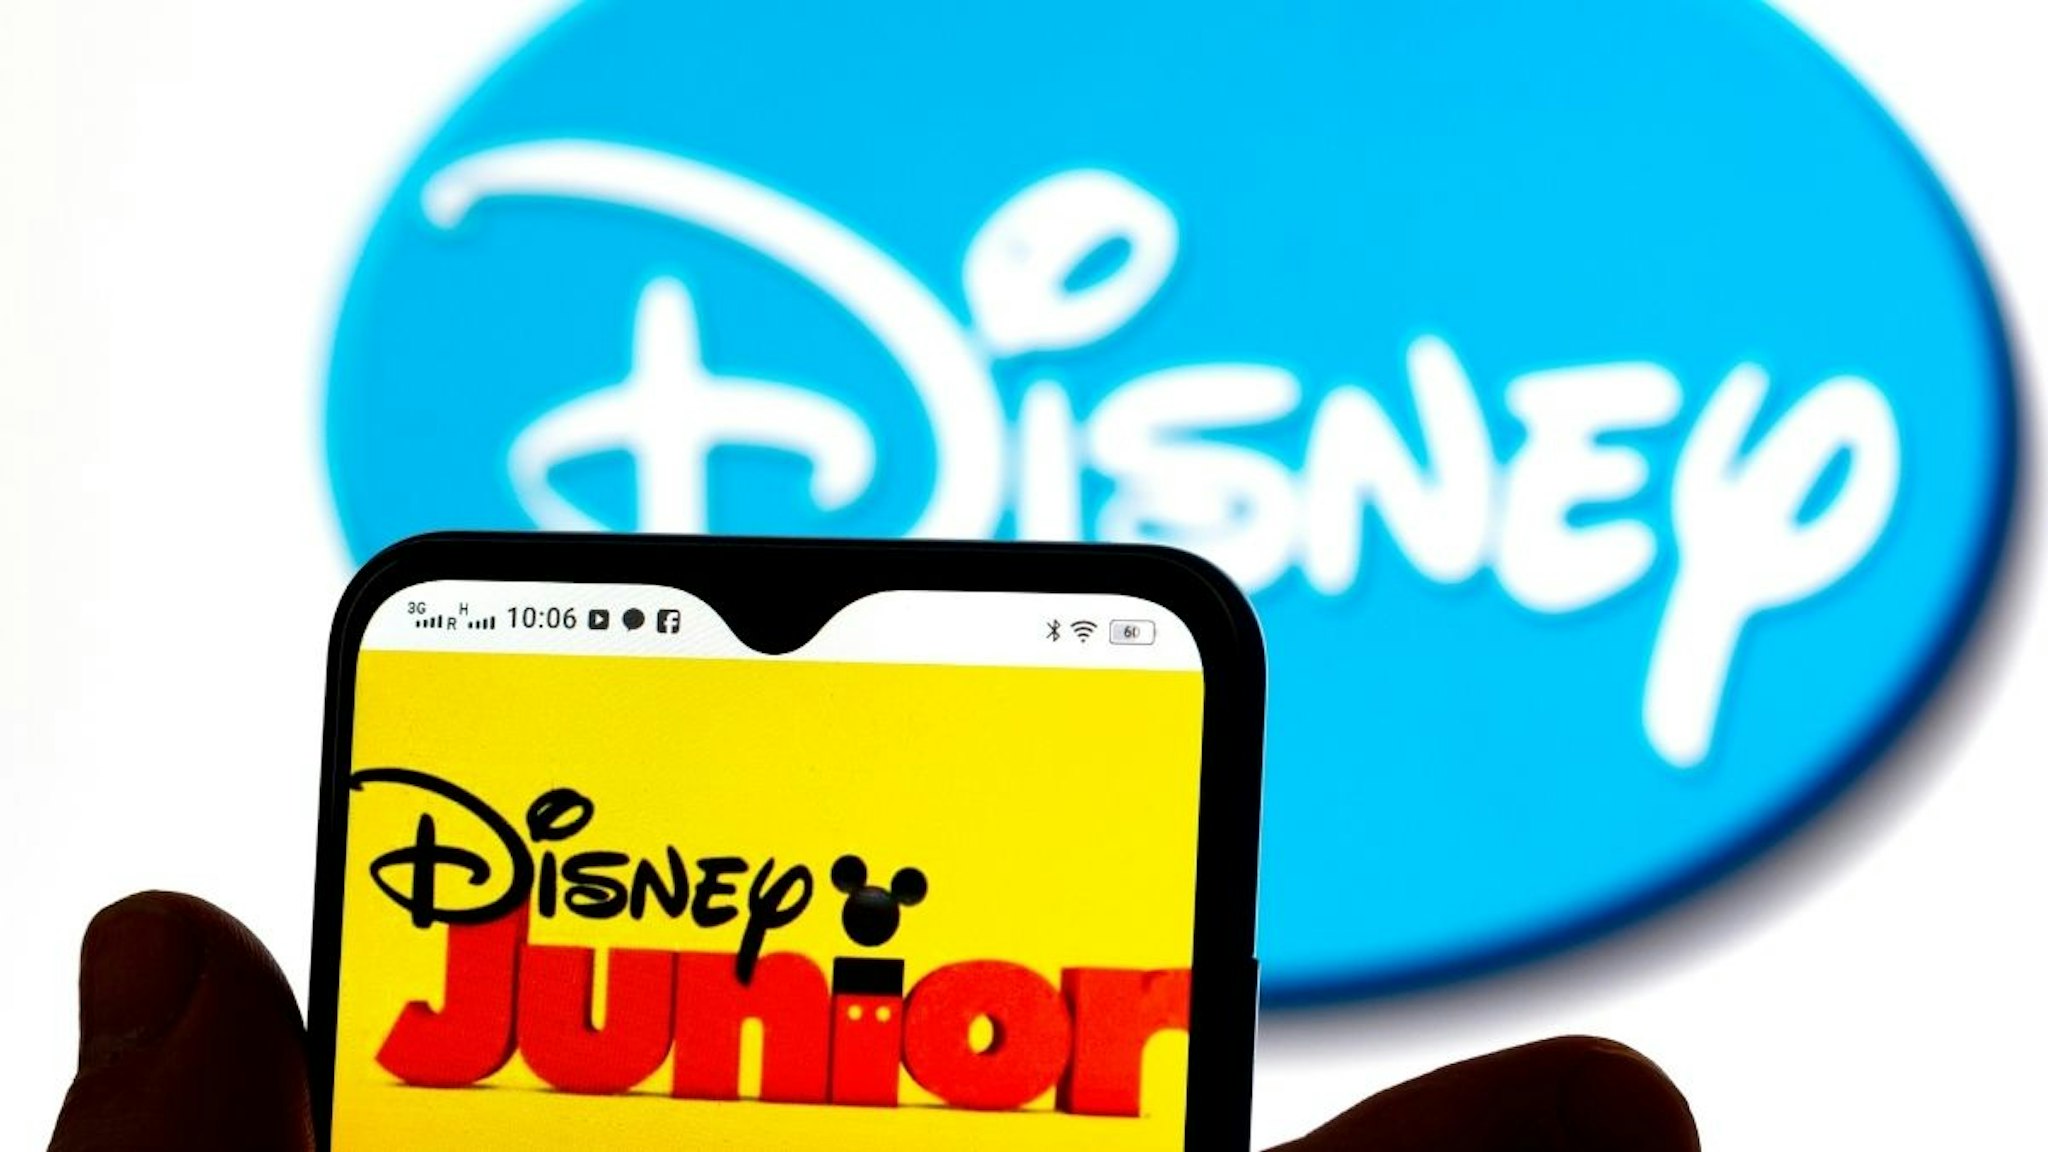 In this photo illustration, the Disney Junior logo is seen displayed on a smartphone screen with a Disney logo in the background.